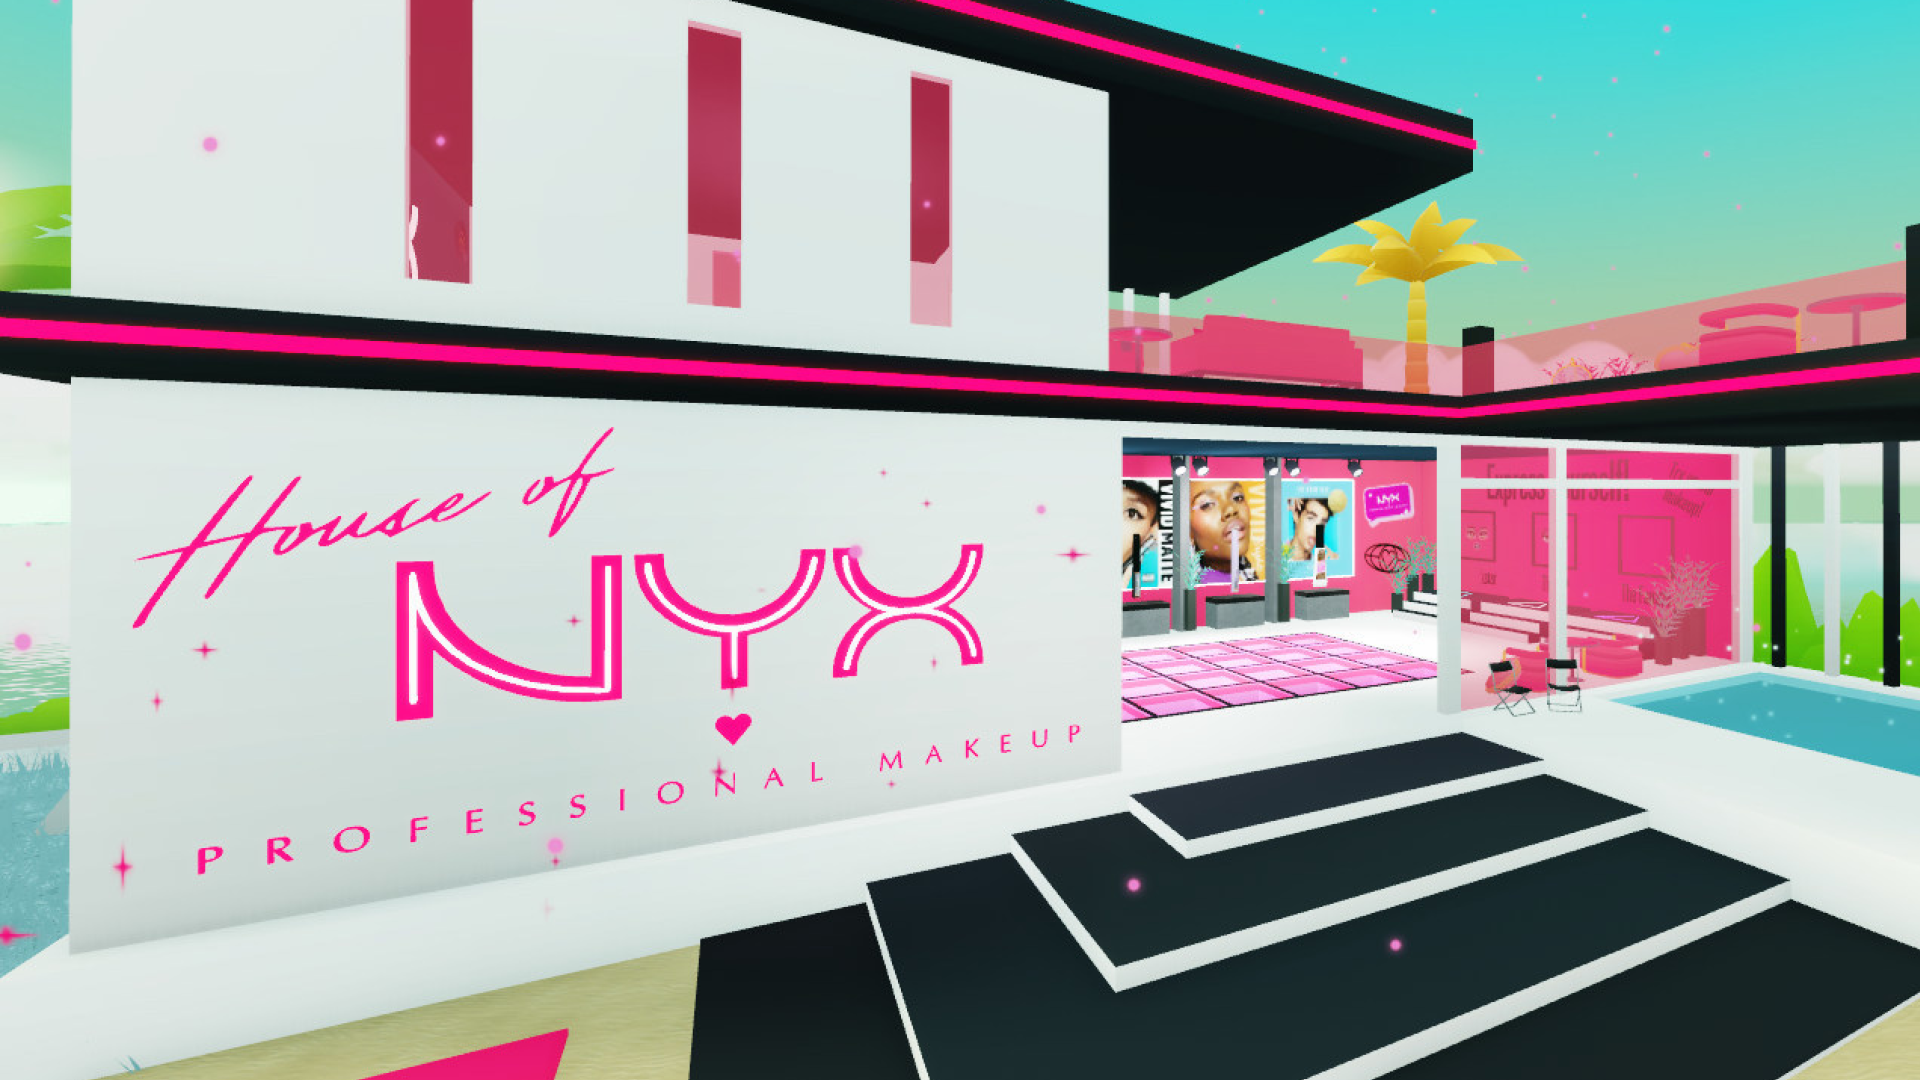 slump Underholde Implement Get Ready with NYX Makeup in the Metaverse | License Global